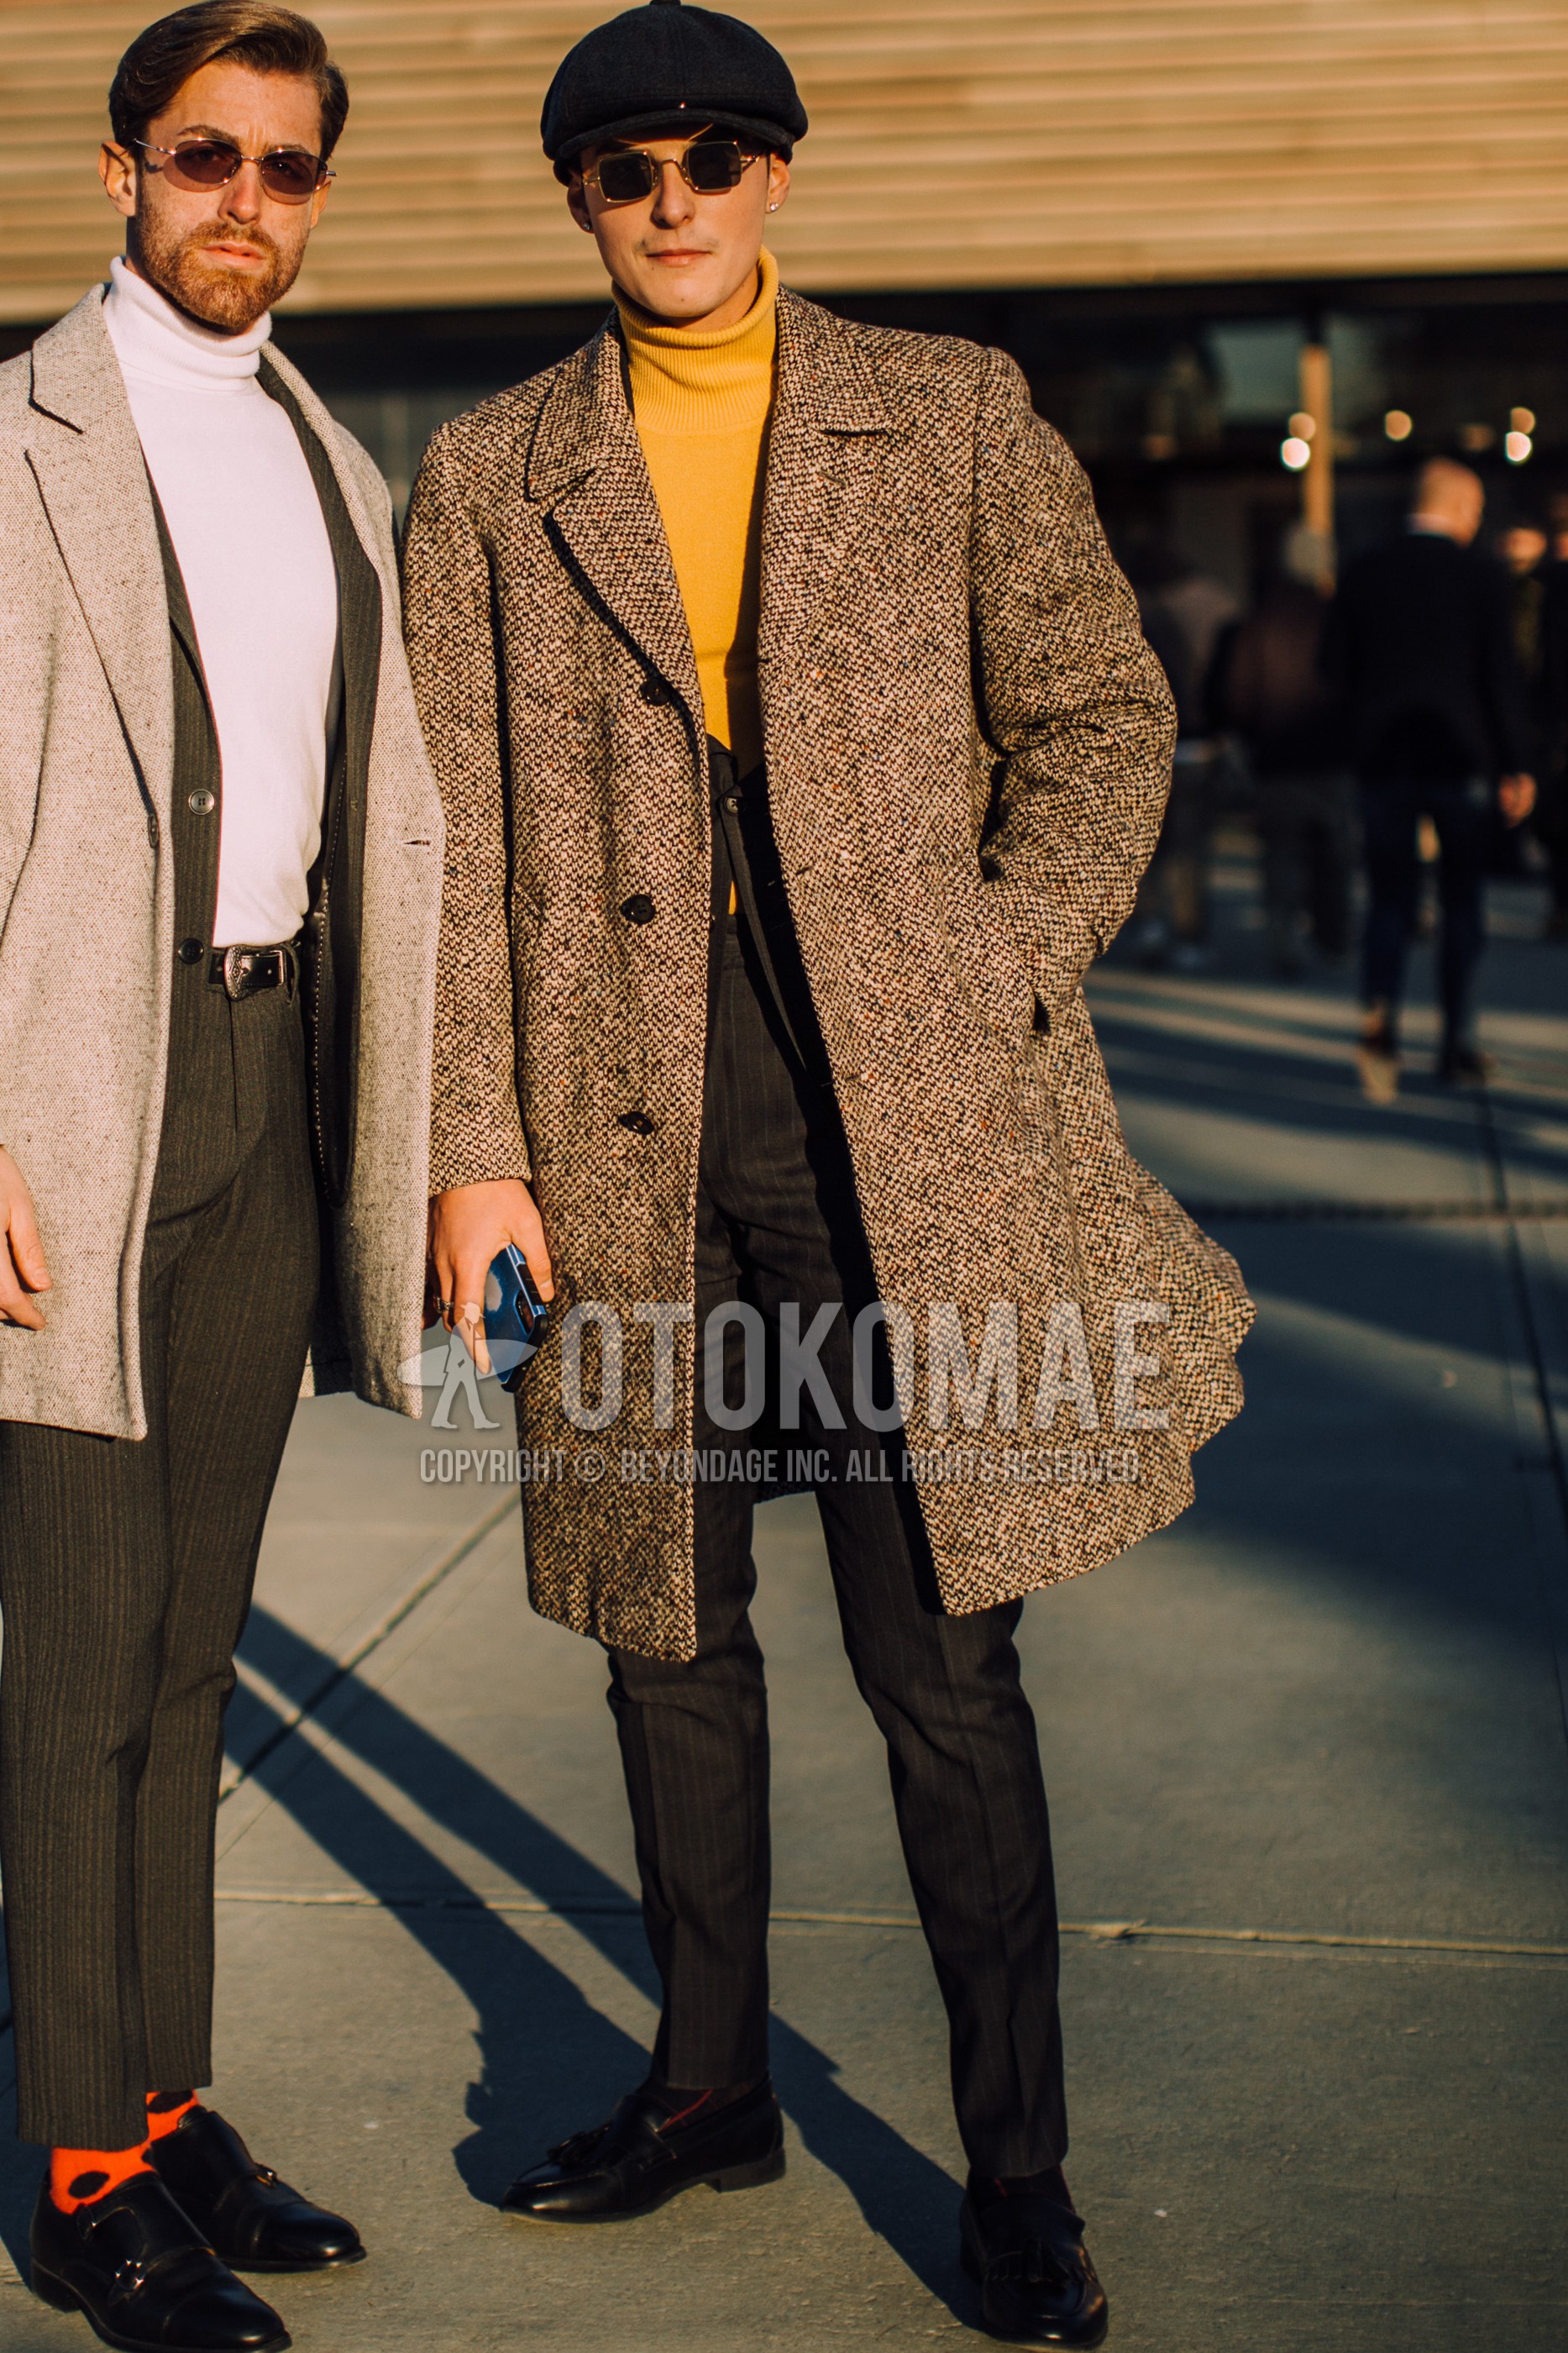 Men's spring winter outfit with black plain hunting cap, silver plain sunglasses, brown check ulster coat, yellow plain turtleneck knit, black tassel loafers leather shoes, black stripes suit.